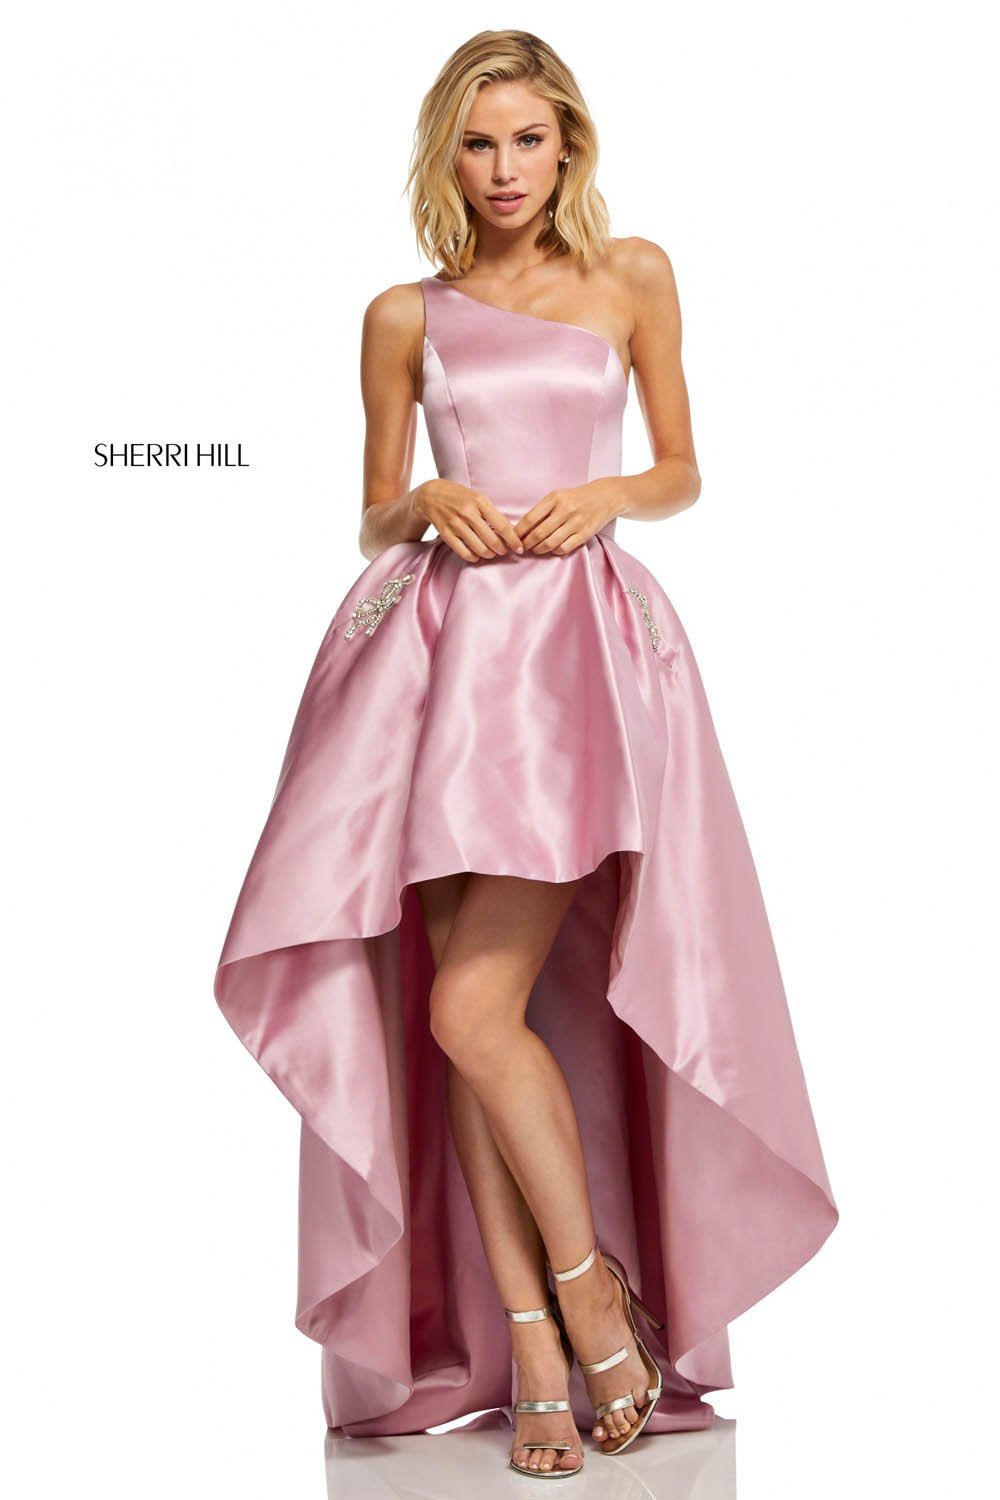 Sherri Hill 52659 dress images in these colors: Ivory, Lilac, Yellow, Red, Berry, Emerald, Royal, Light Blue, Rose.